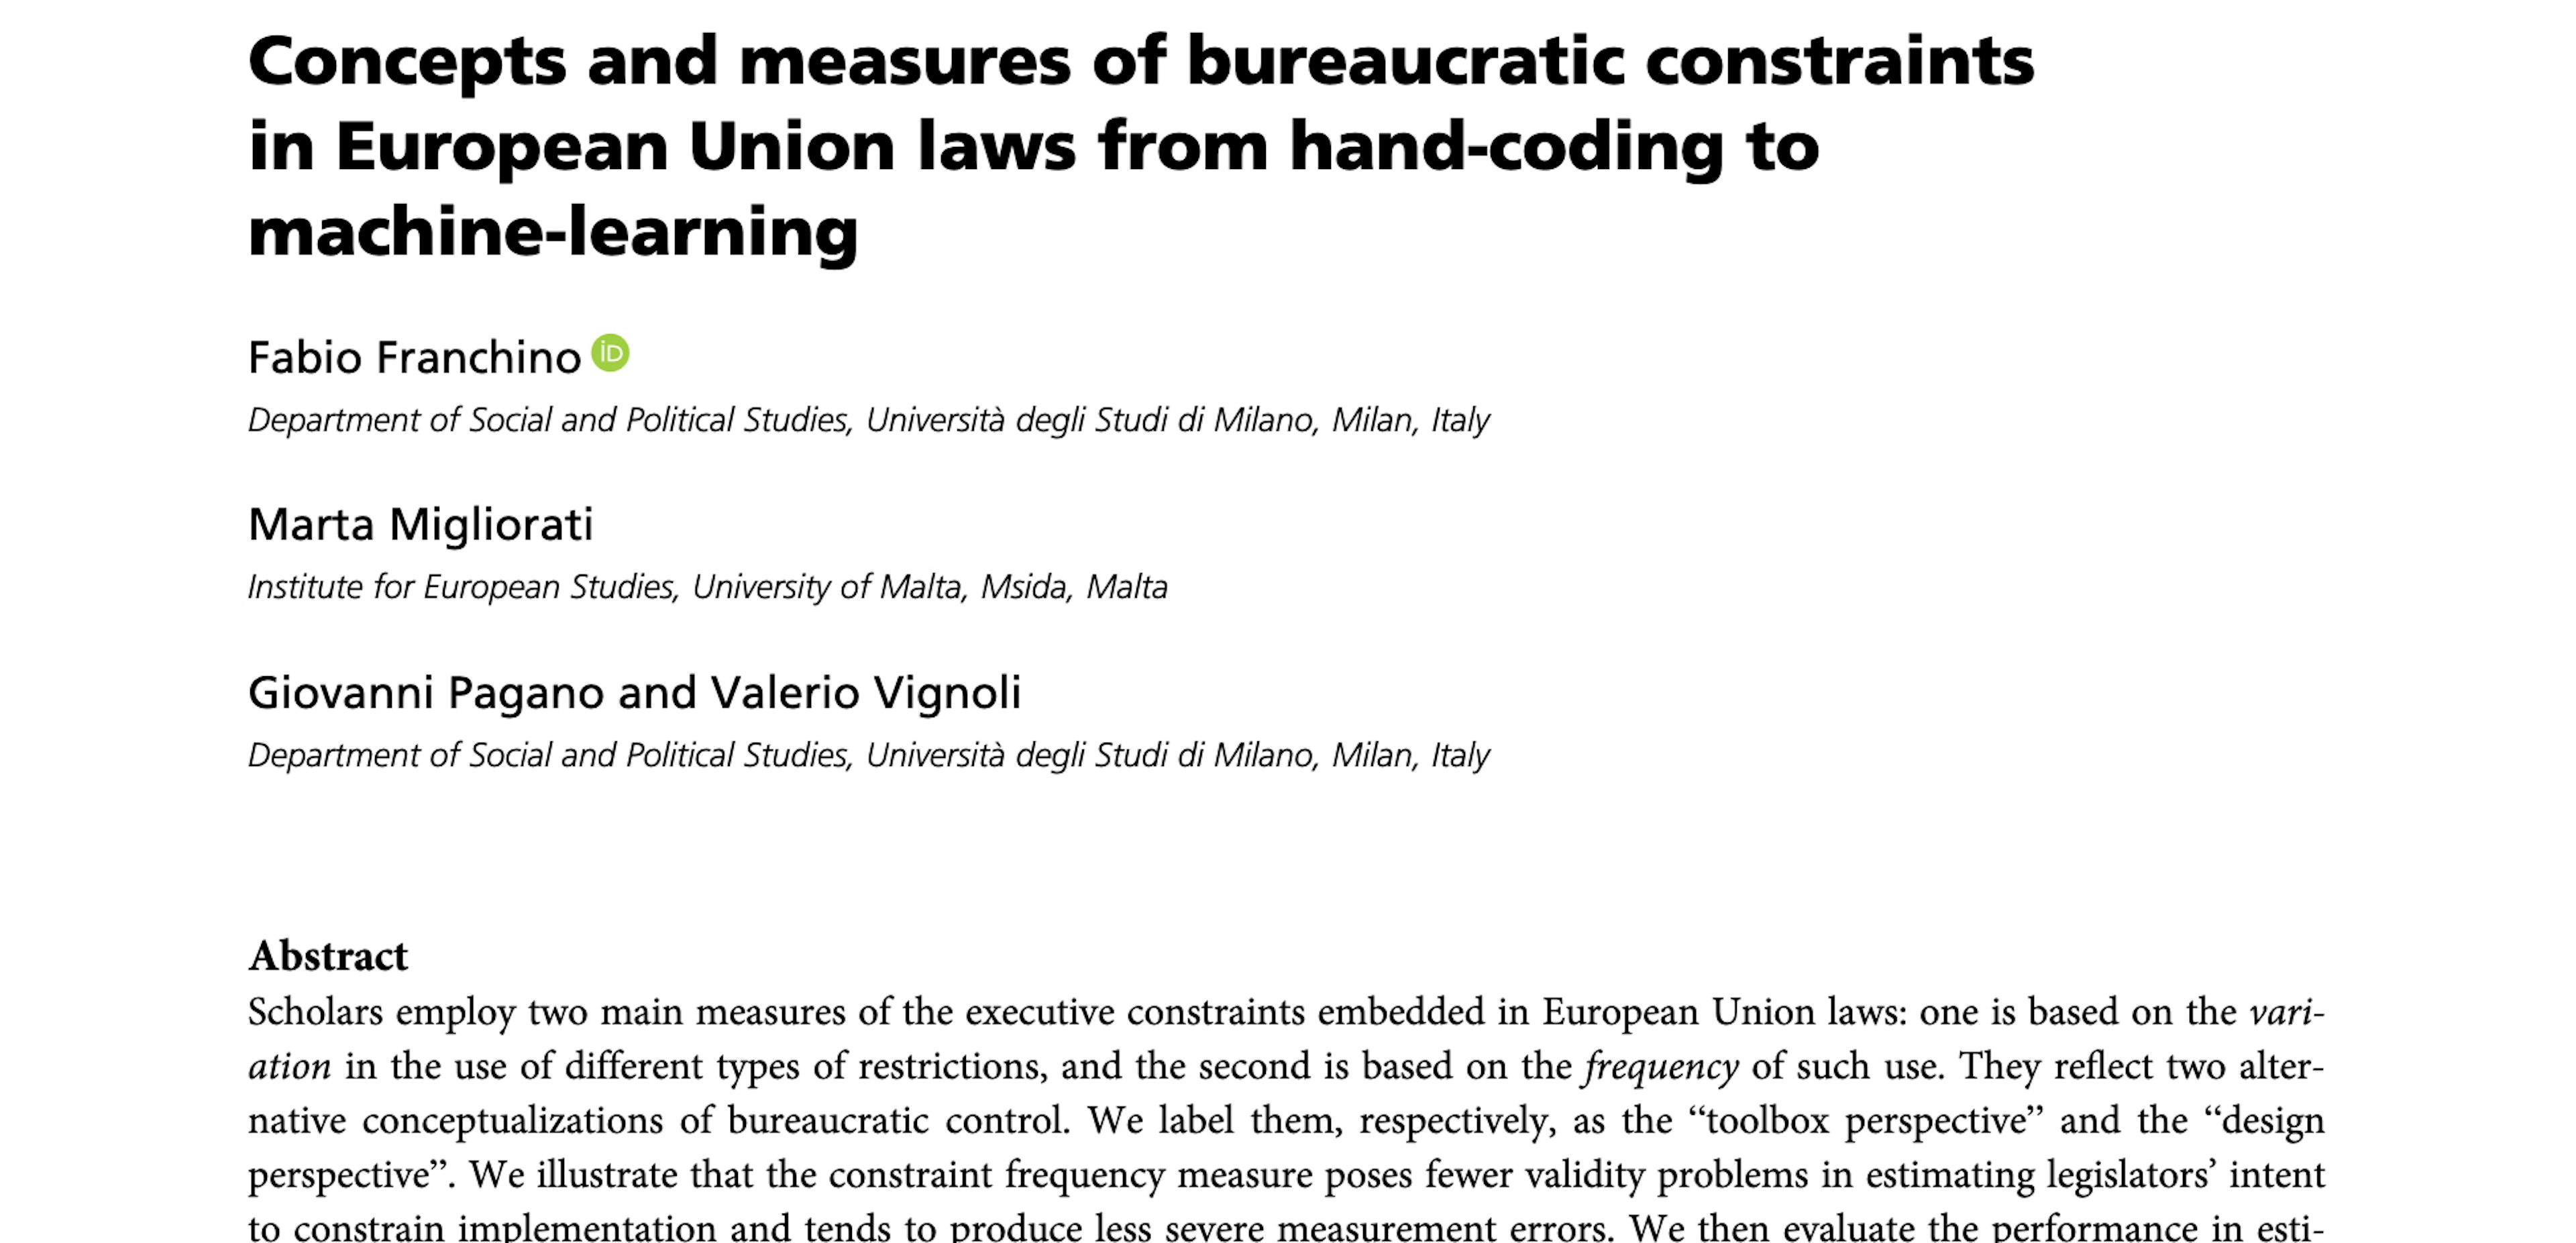 Concepts and measures of bureaucratic constraints in European Union laws from hand-coding to machine-learning